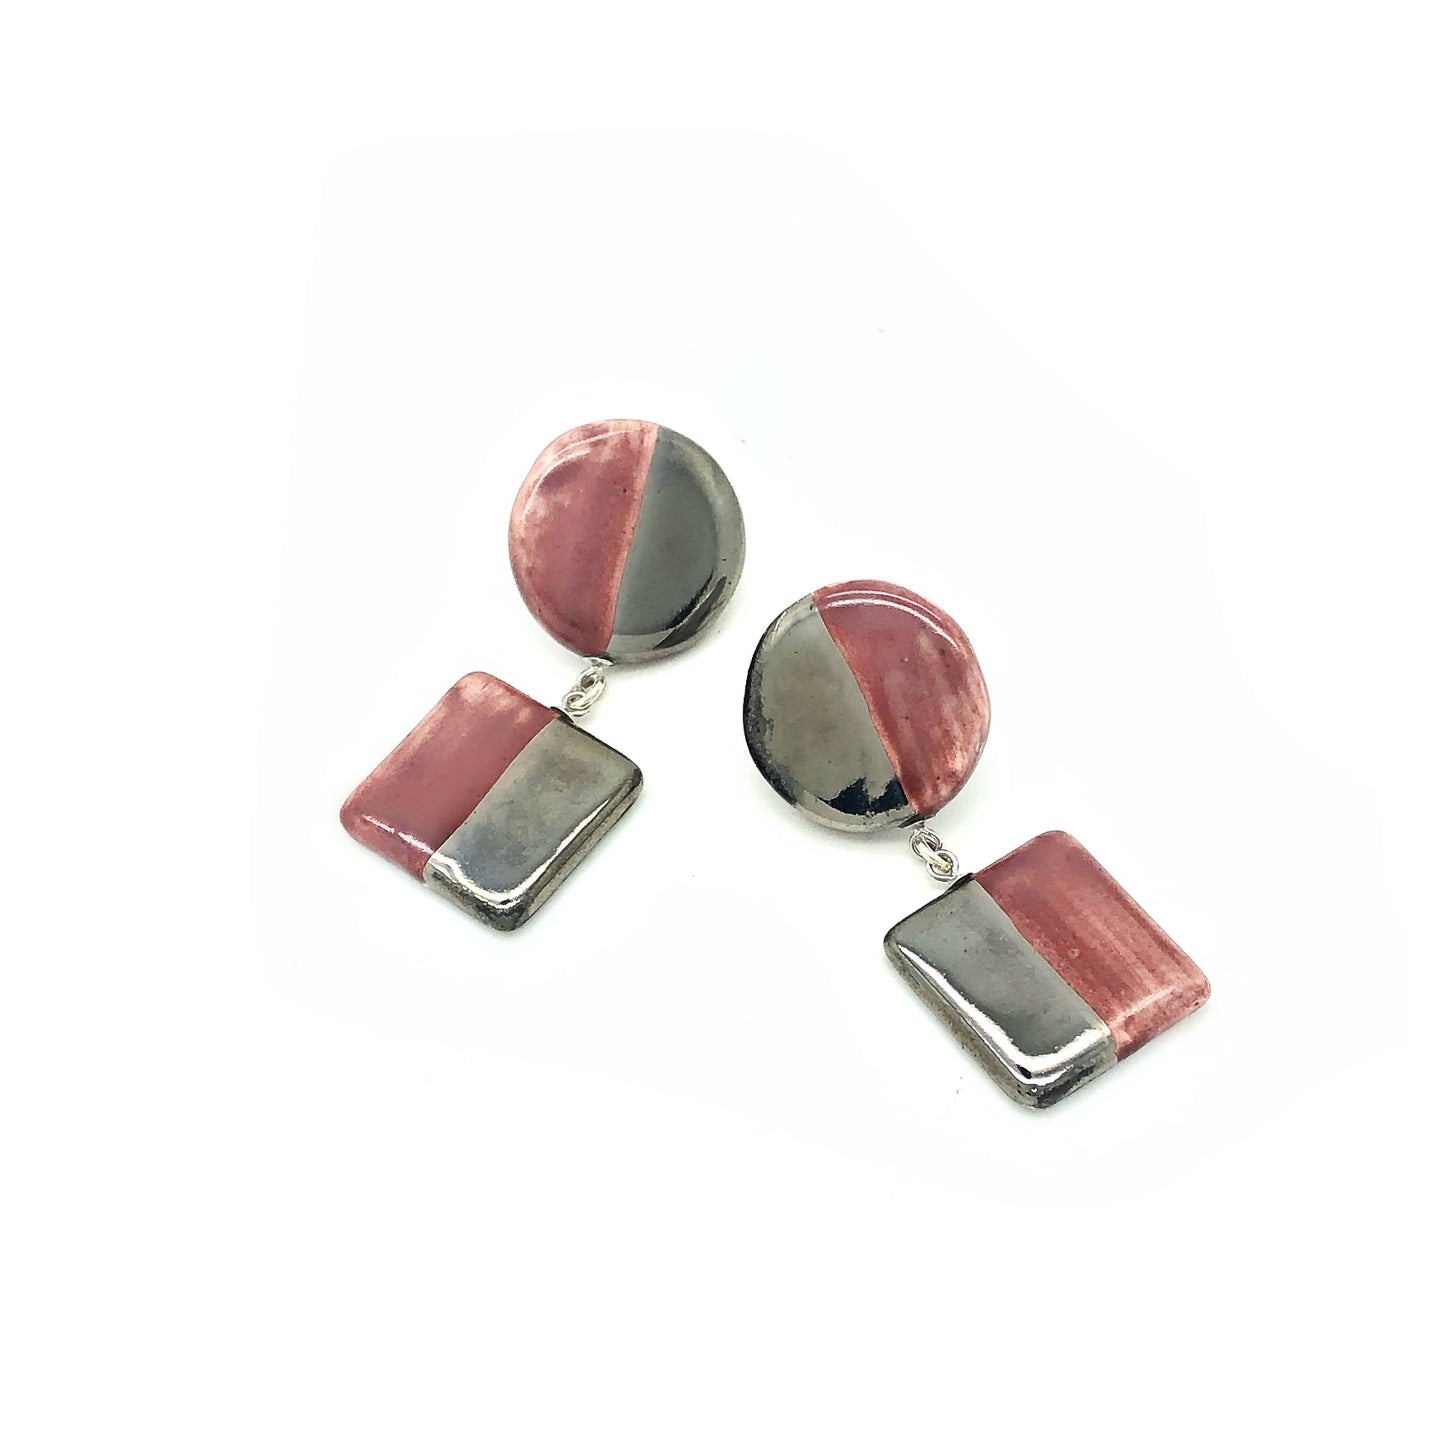 Platinum and pink earrings